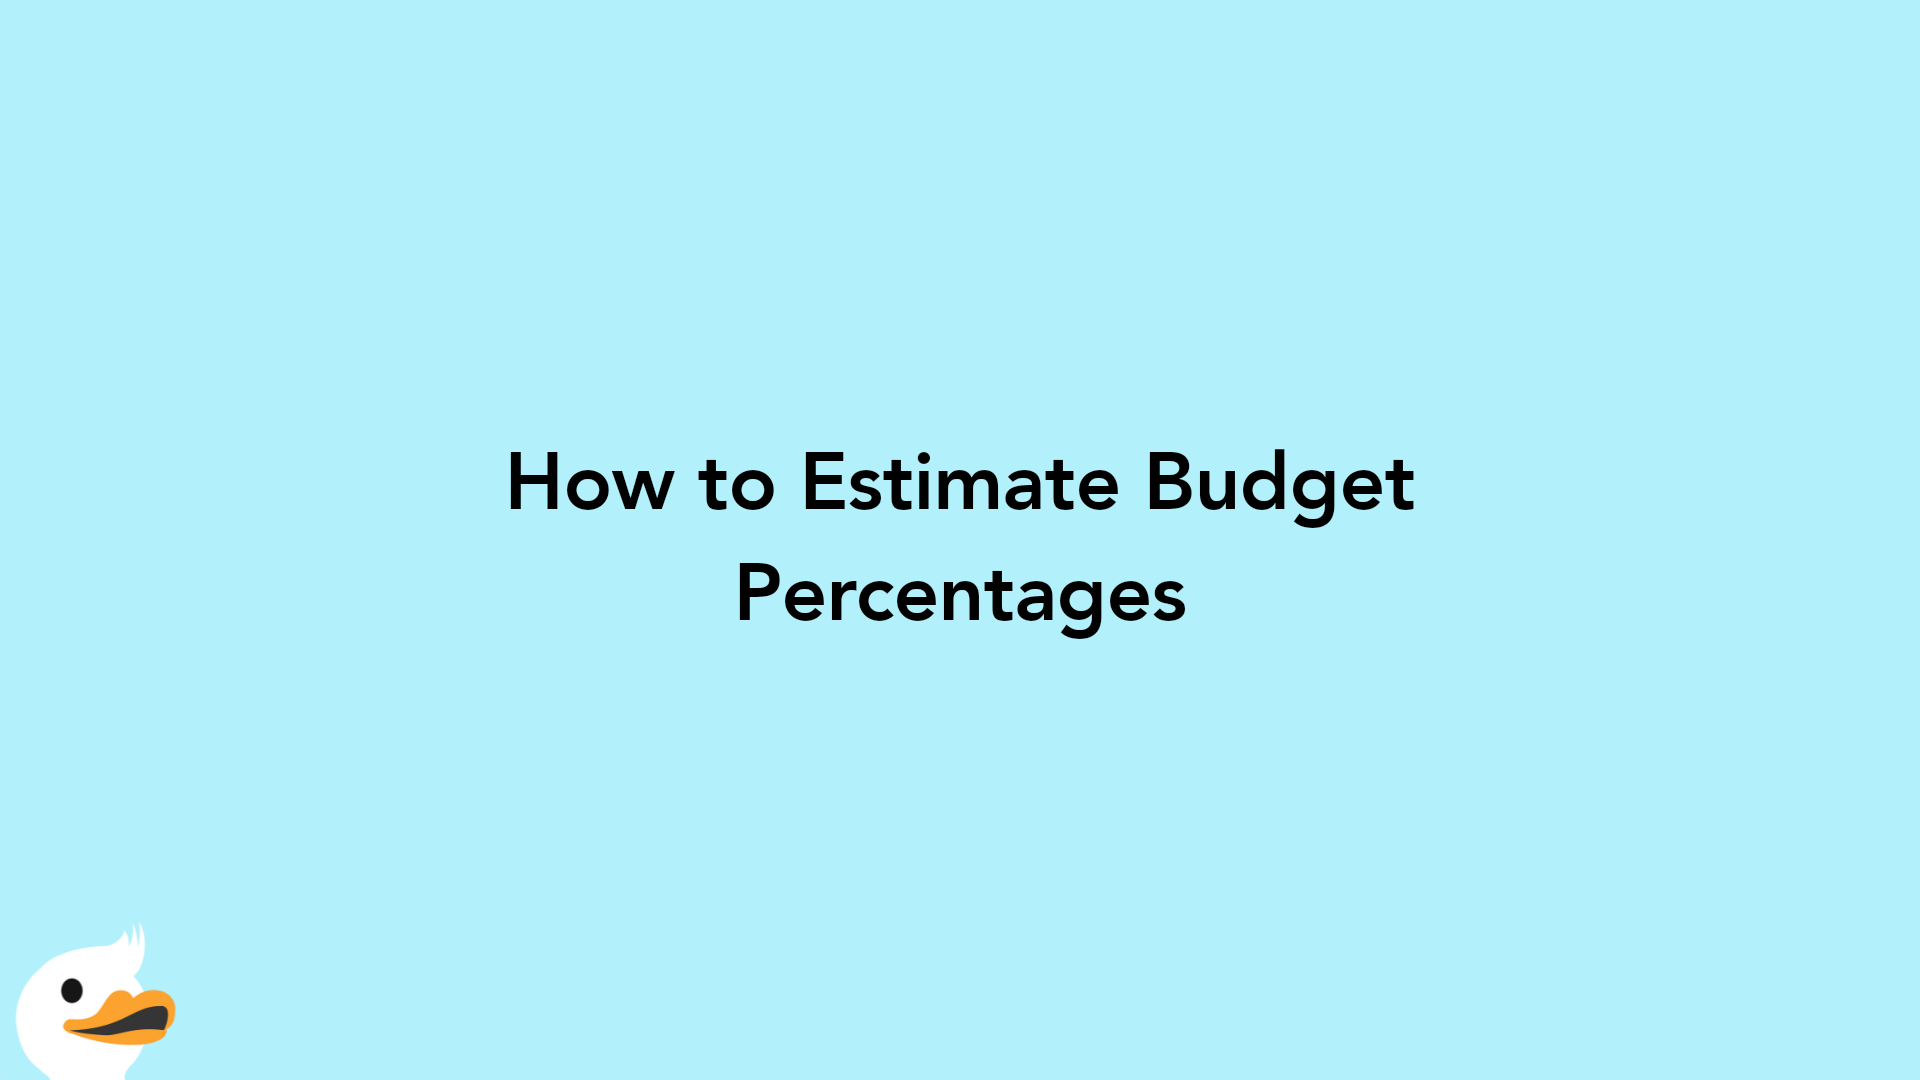 How to Estimate Budget Percentages